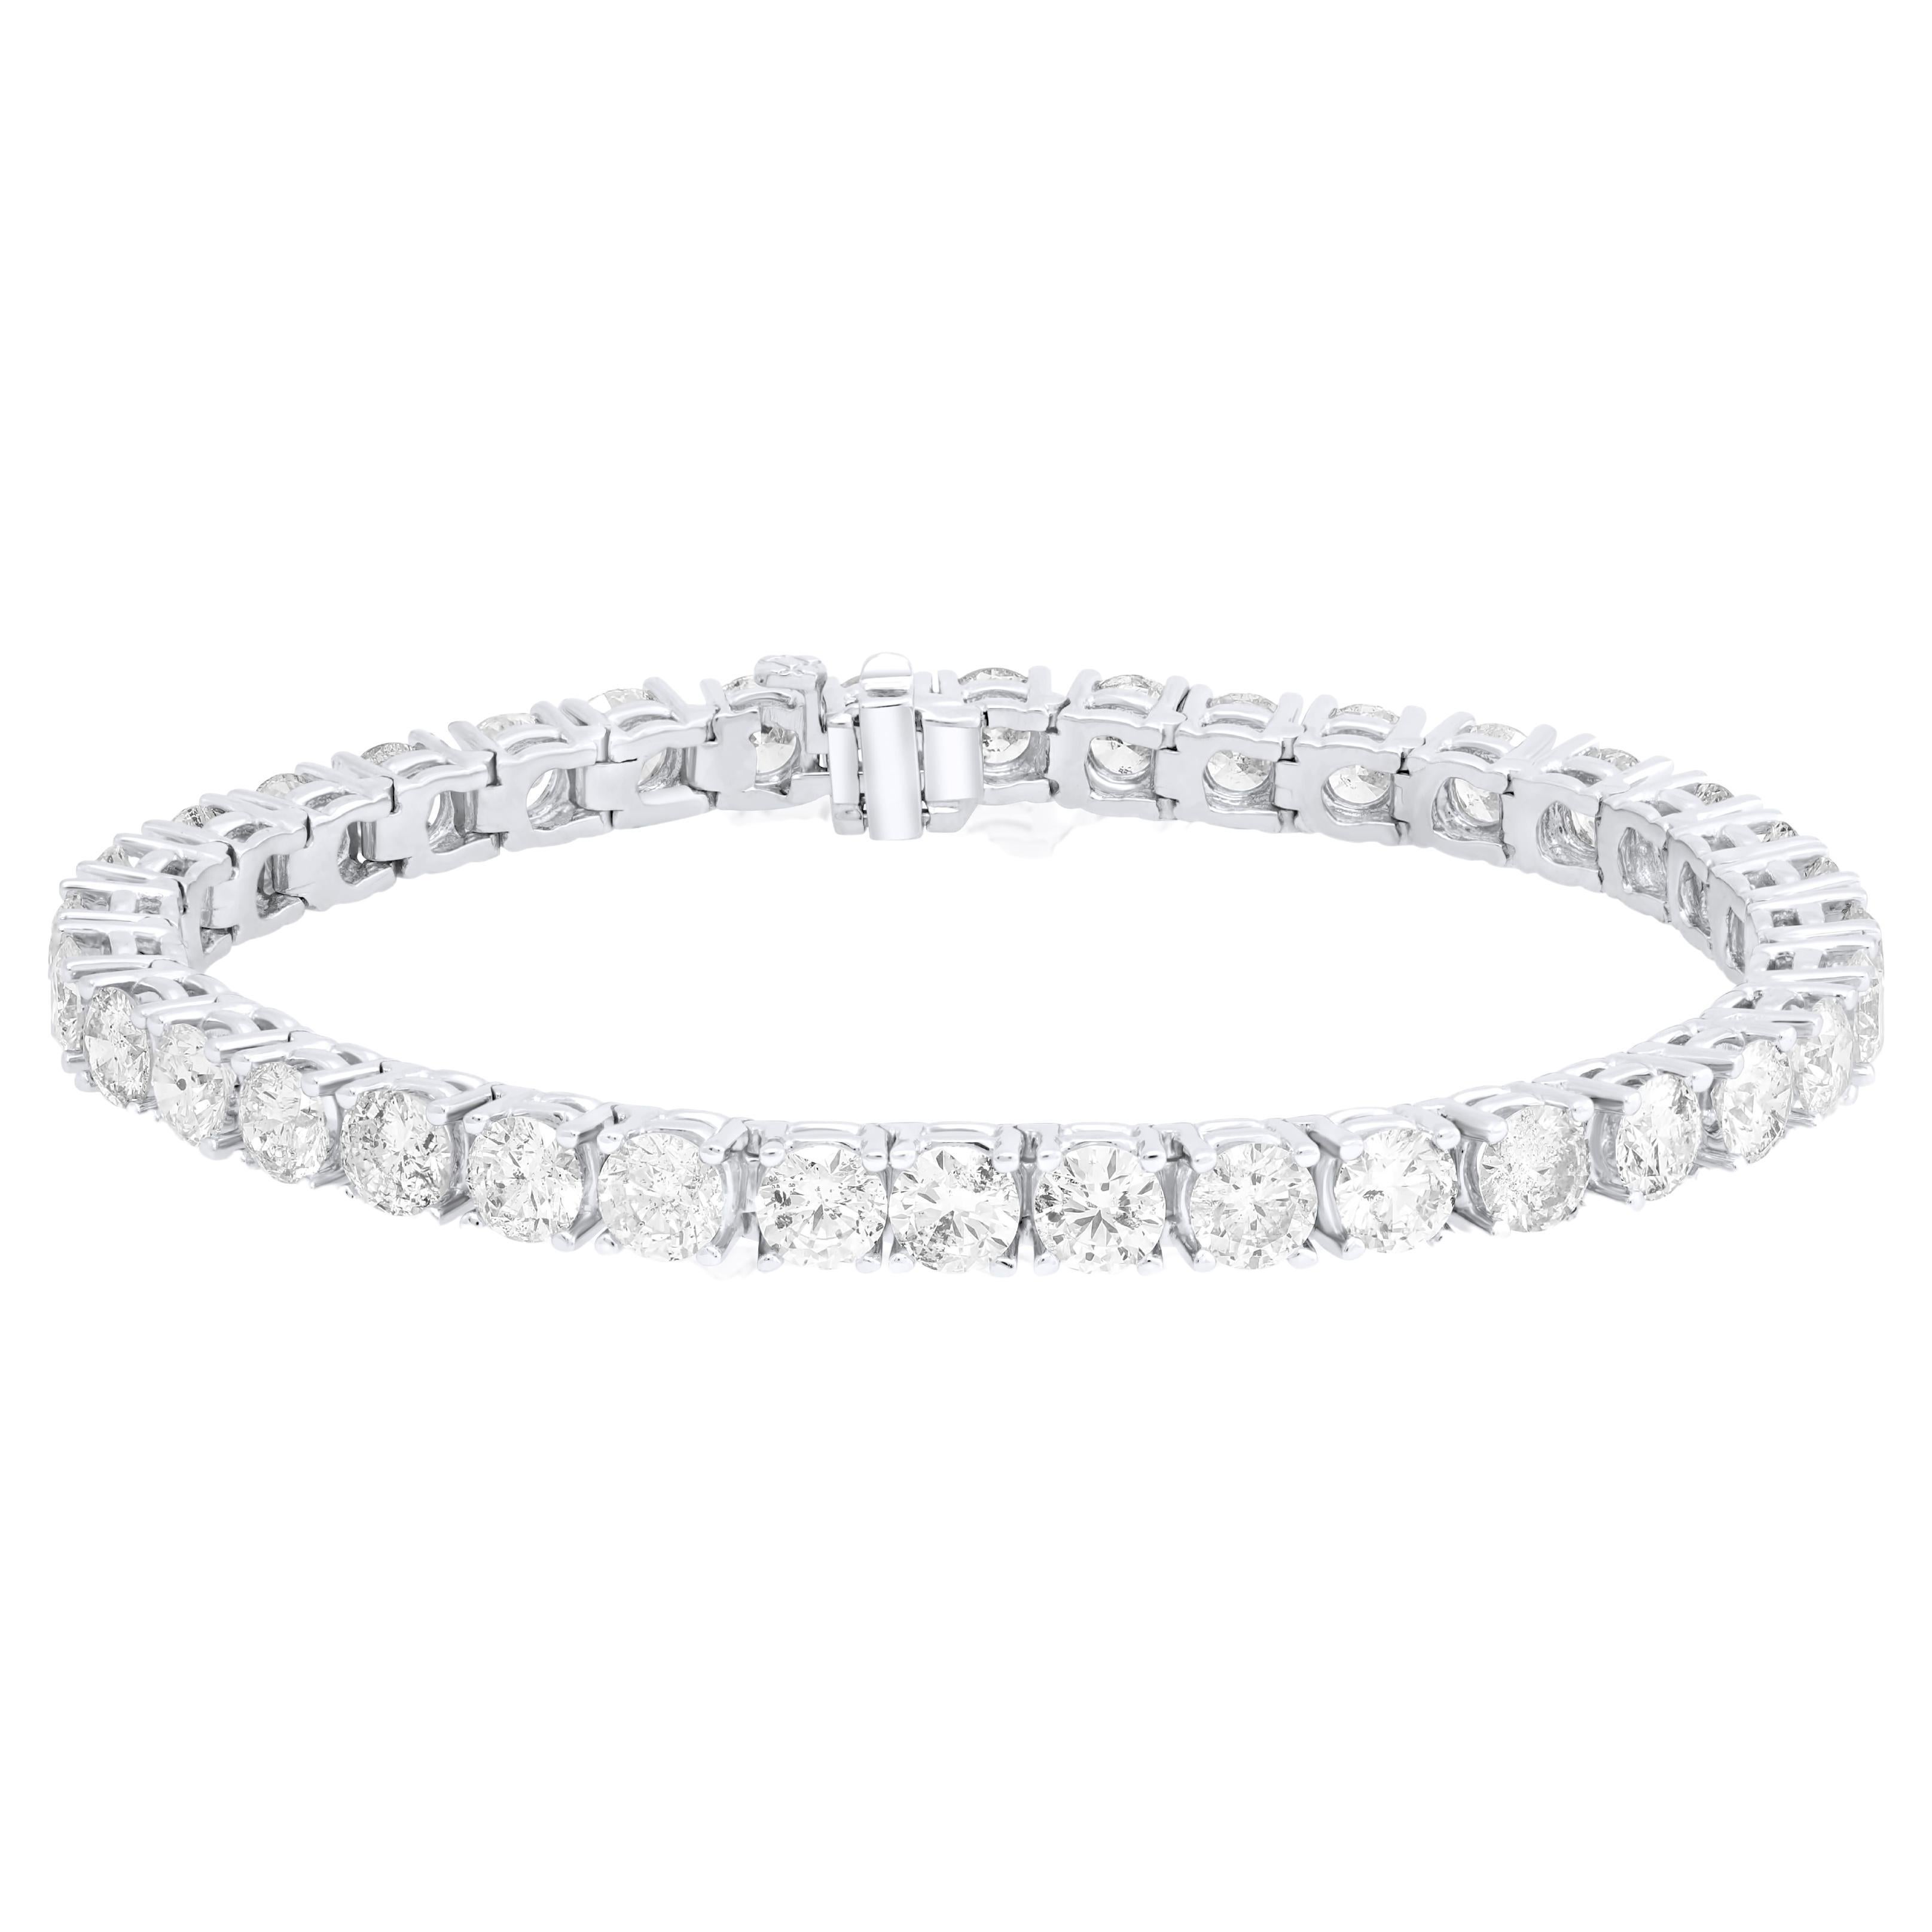 Diana M. 18 kt white gold 4 prong diamond tennis bracelet adorned with 15.85 cts For Sale